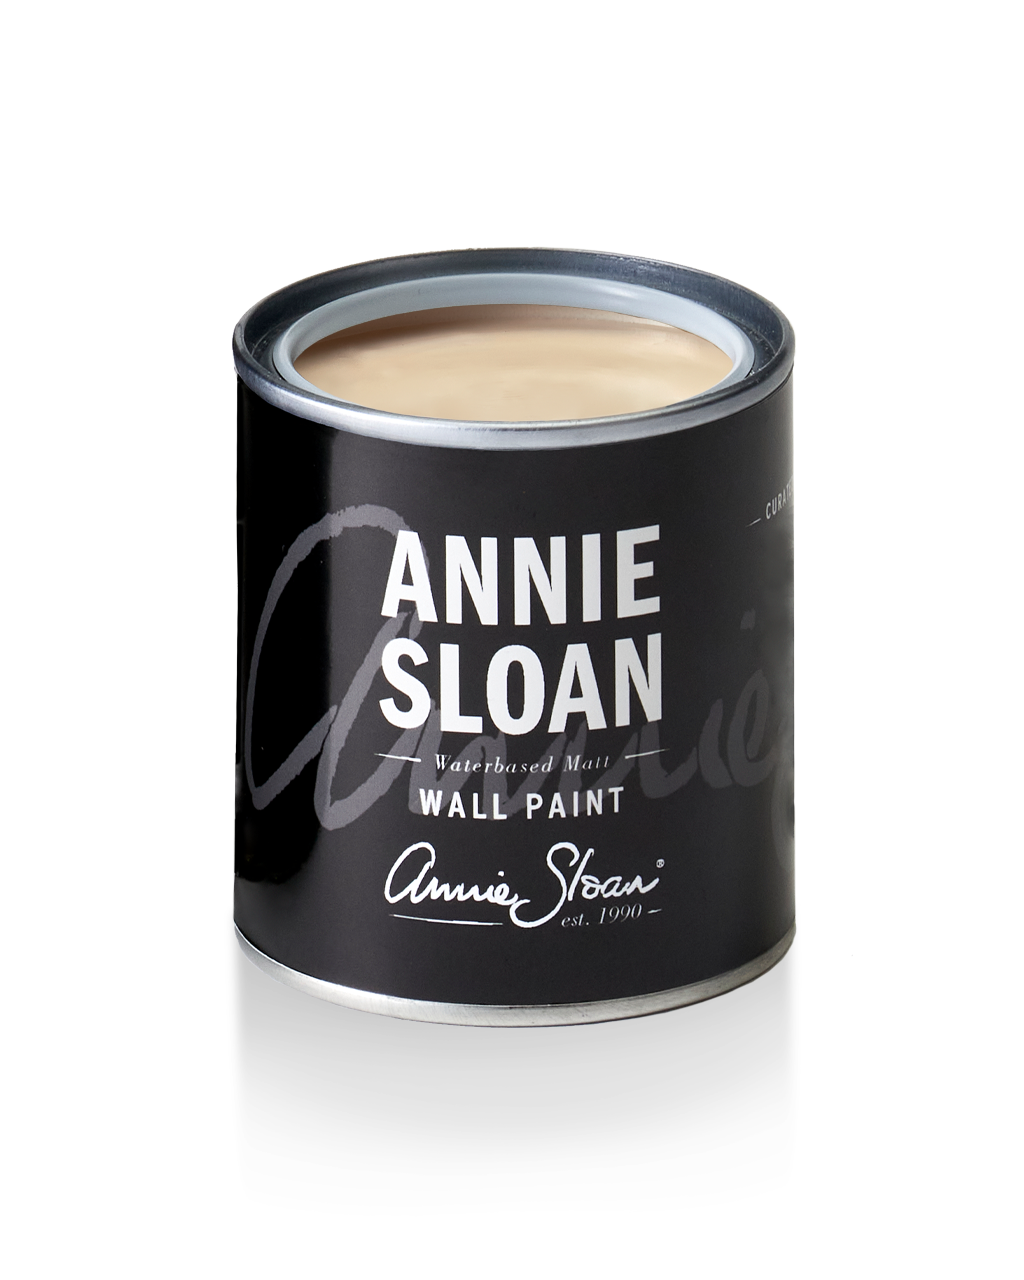 Old Ochre Wall Paint in 120ml tin by Annie Sloan